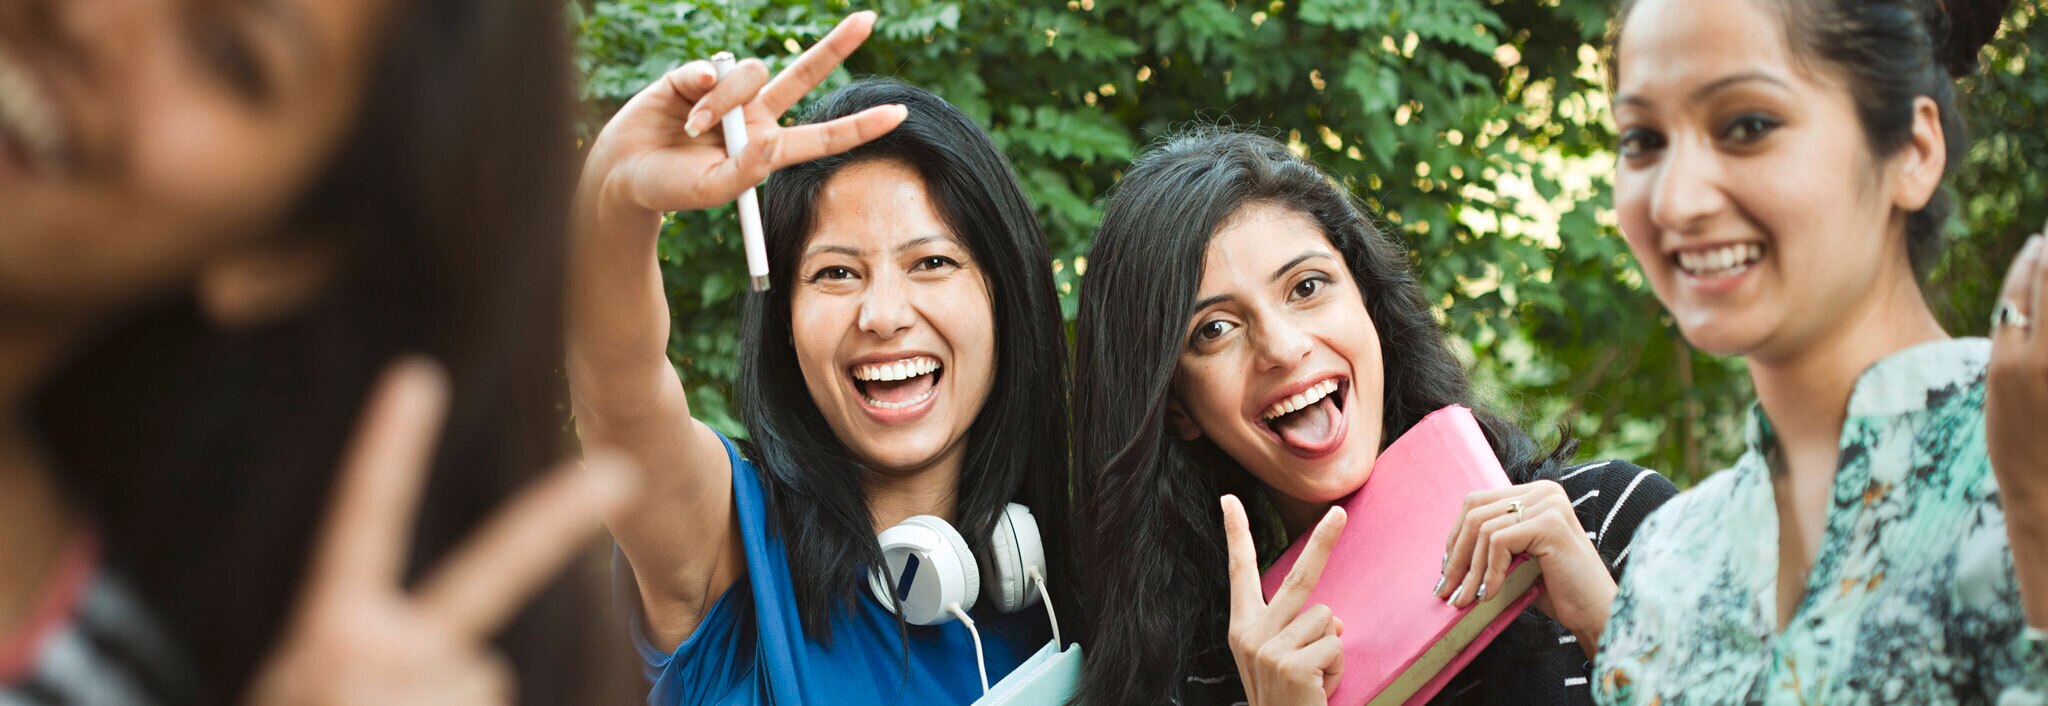 Two women laughing and making two-fingered peace gestures at the camera. One of the girls is wearing large headphones and holding a school notebook.